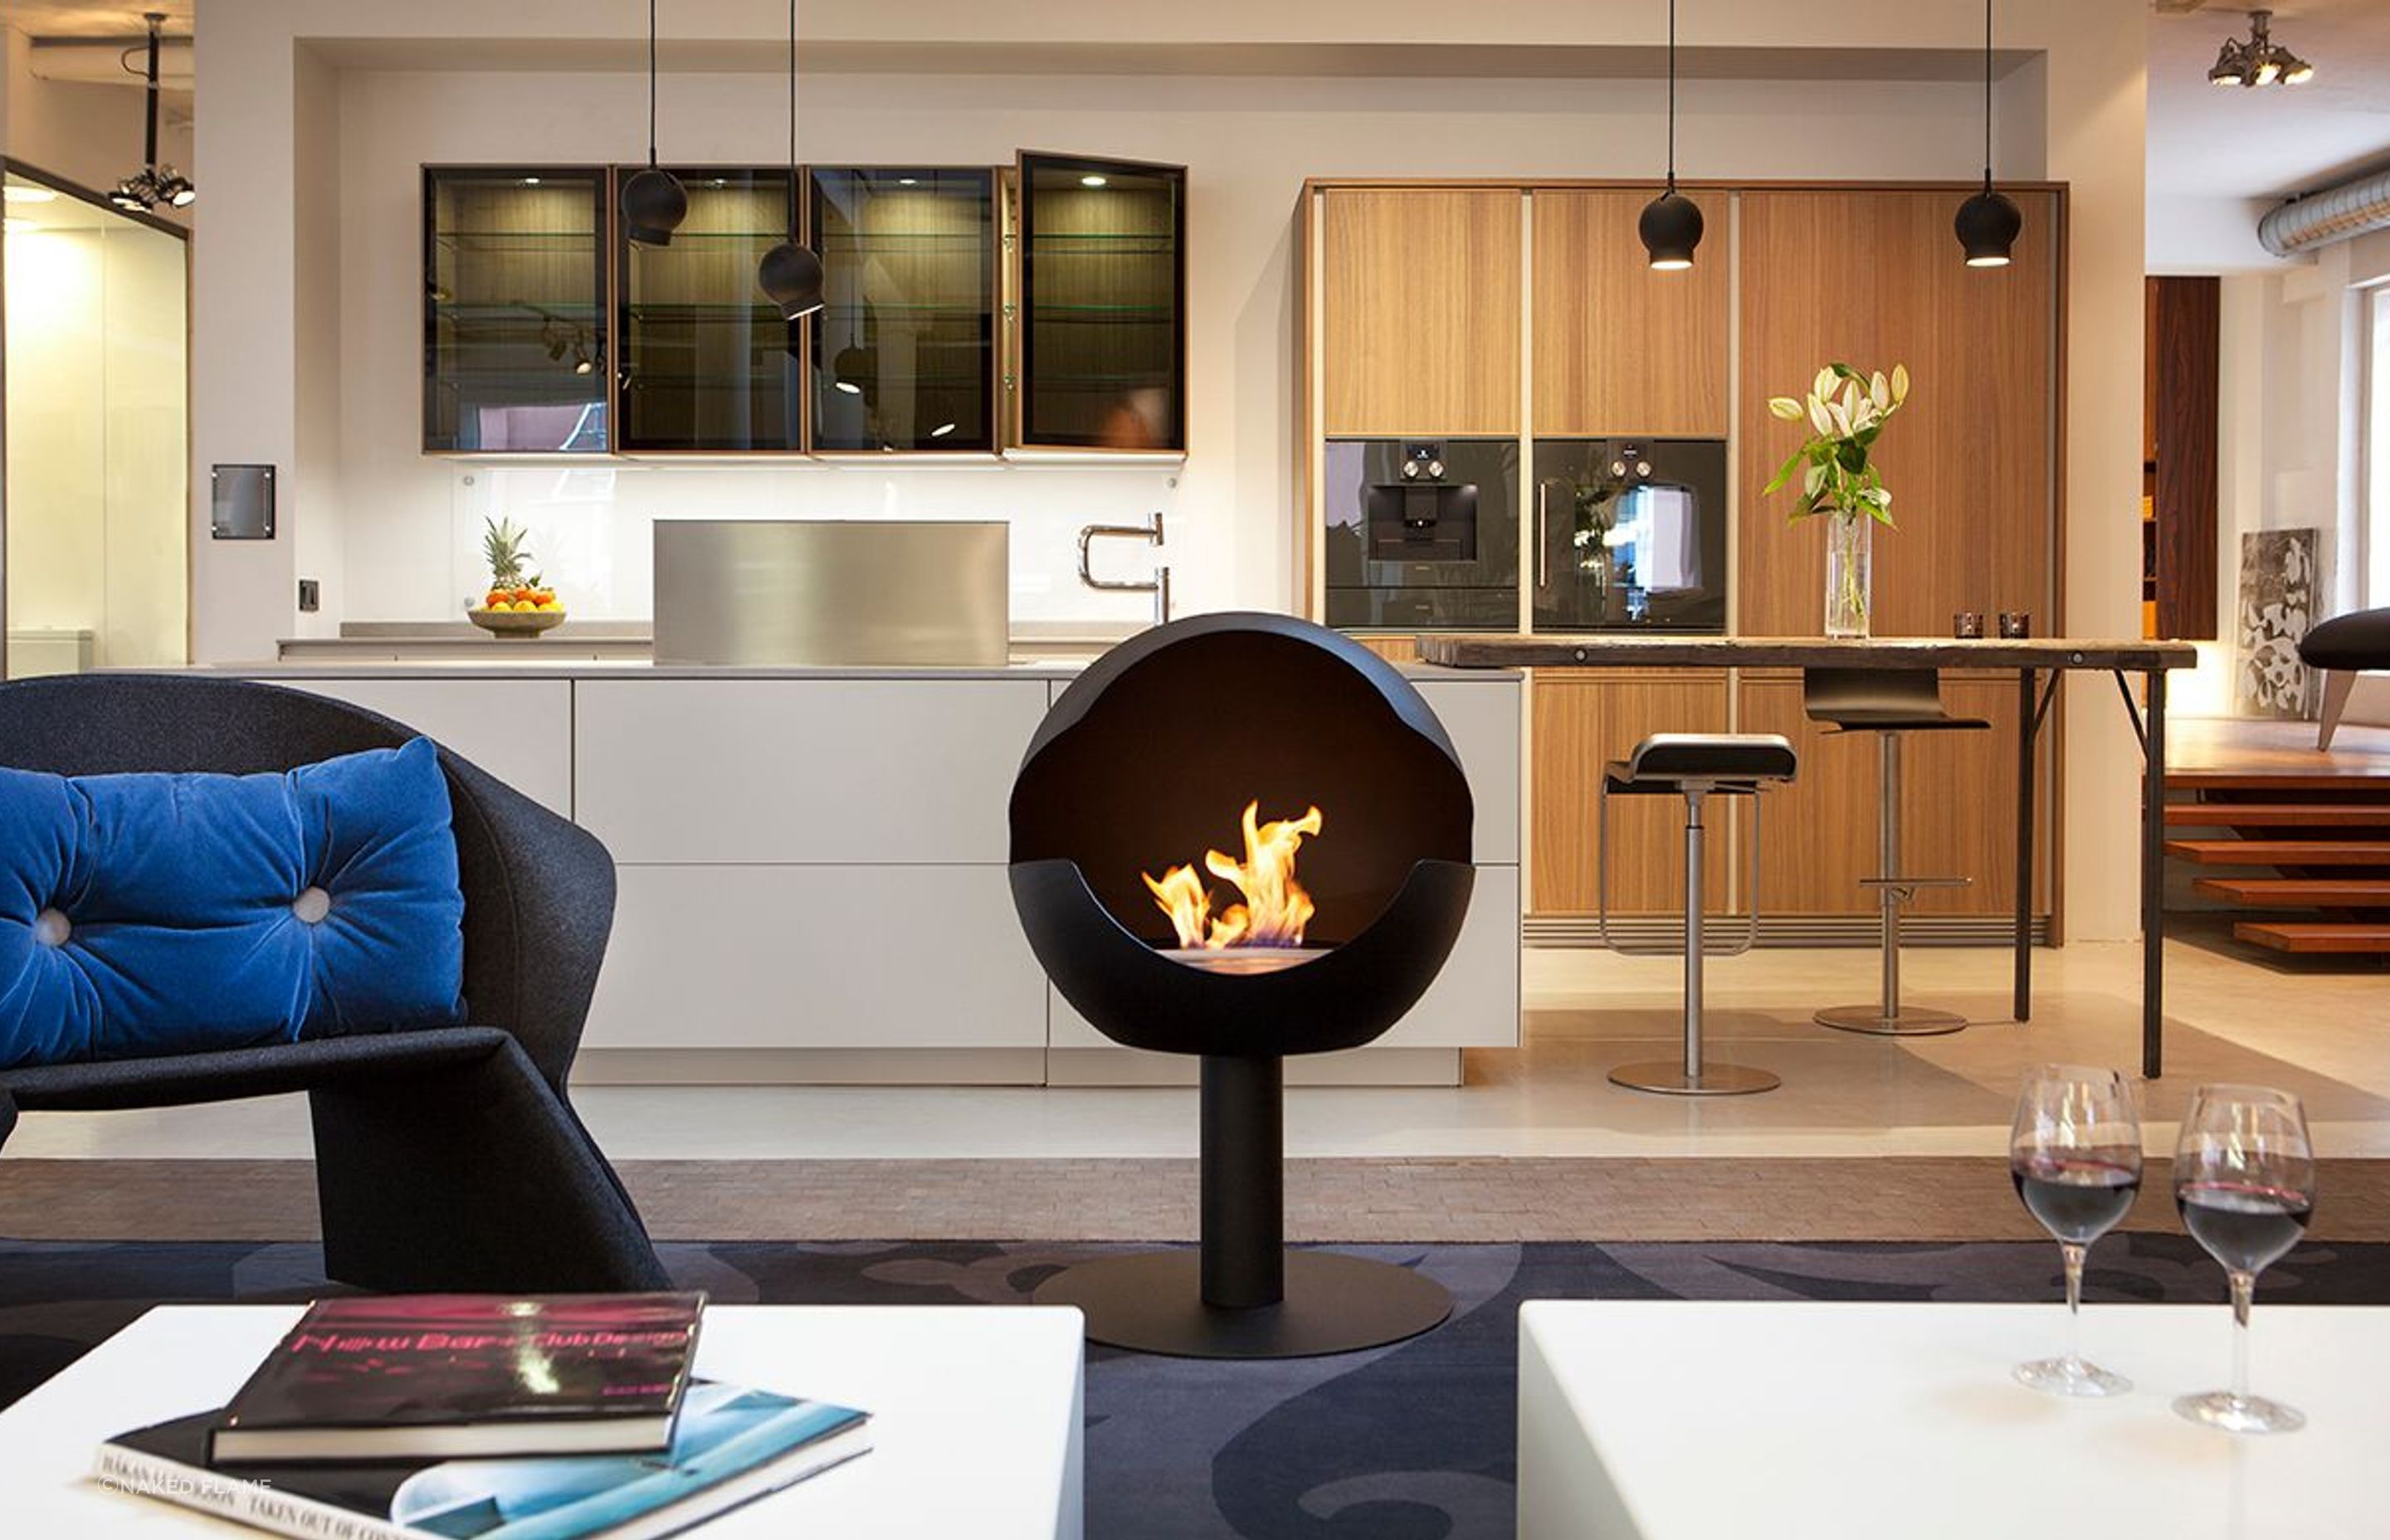 Bioethanol fires can be placed anywhere, as they don't require special ventilation.